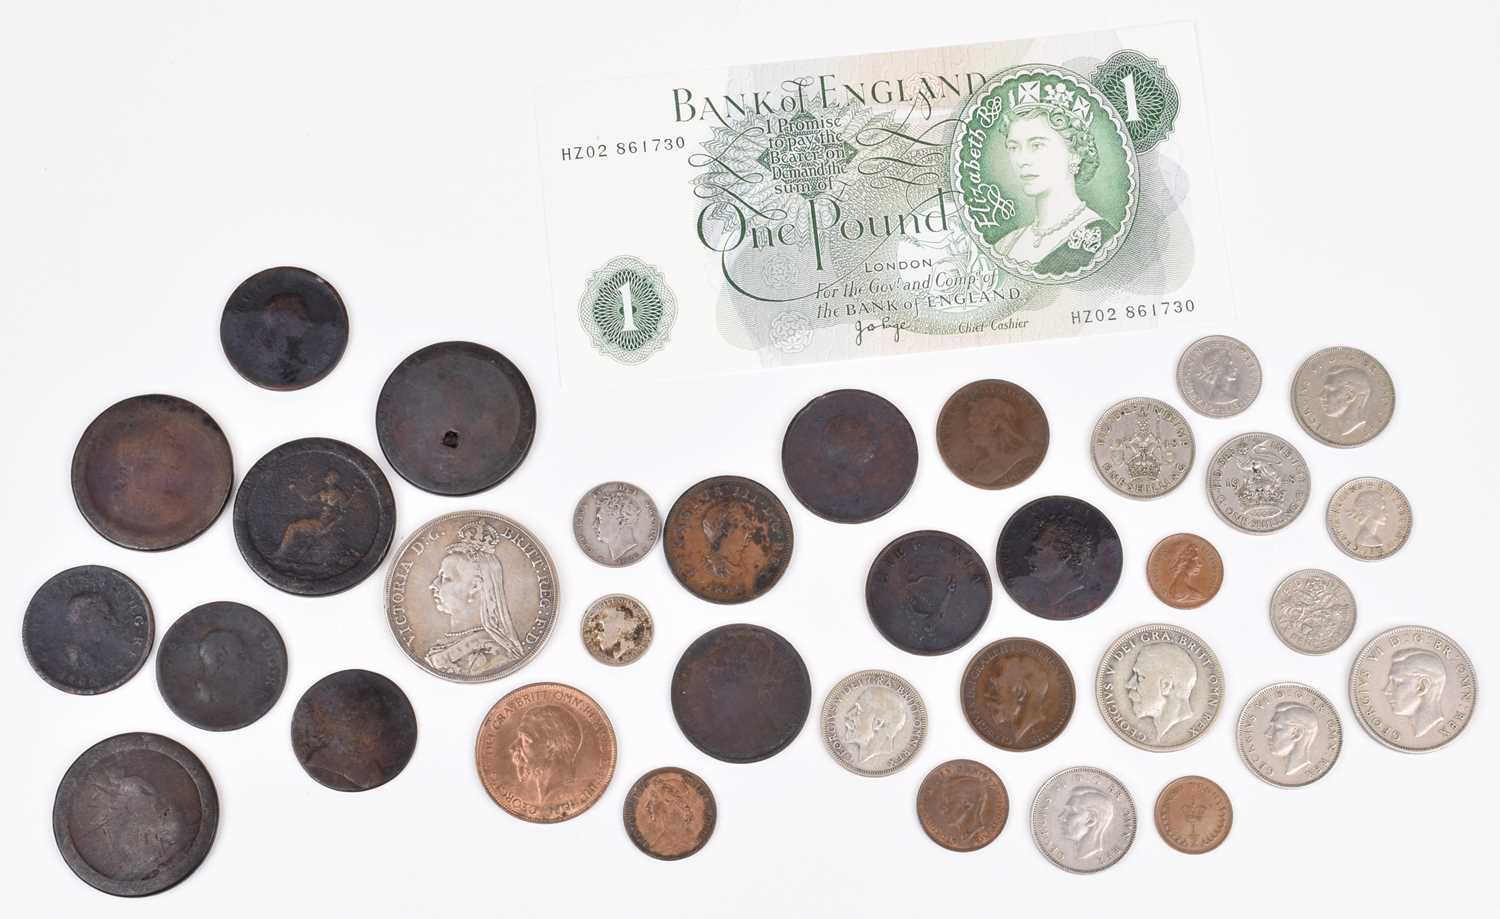 Lot 74 - An assortment of various historical coinage and a One Pound banknote.